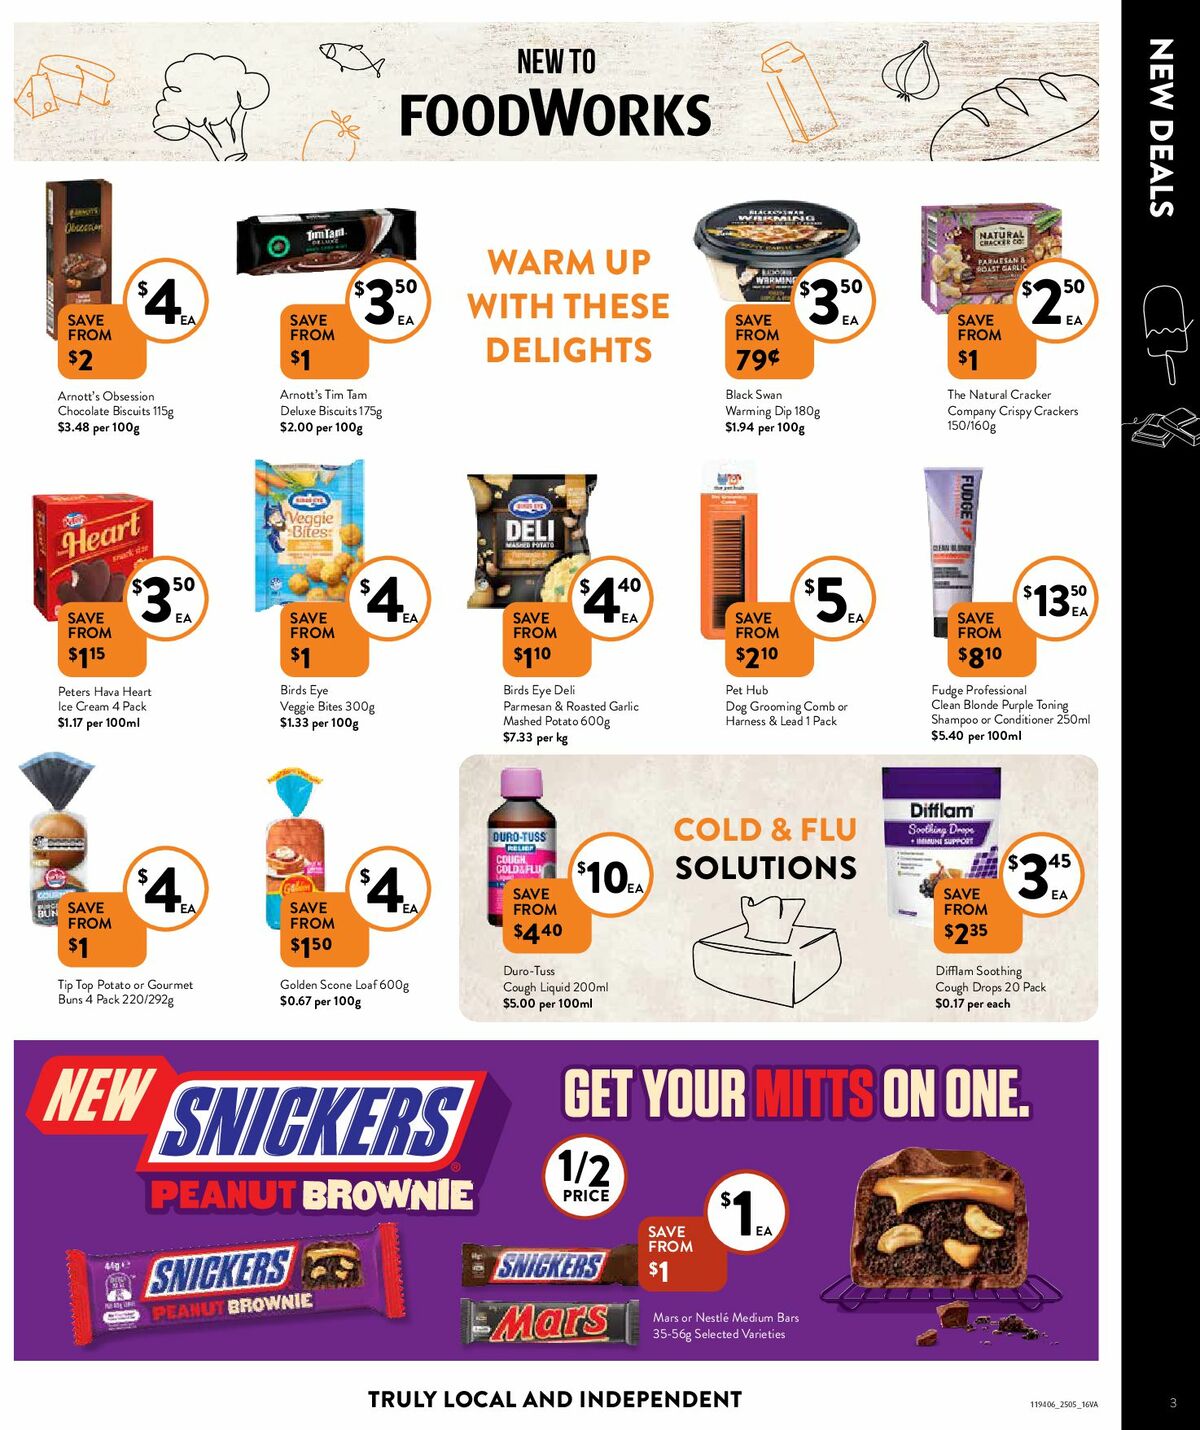 FoodWorks Supermarket Catalogues from 25 May